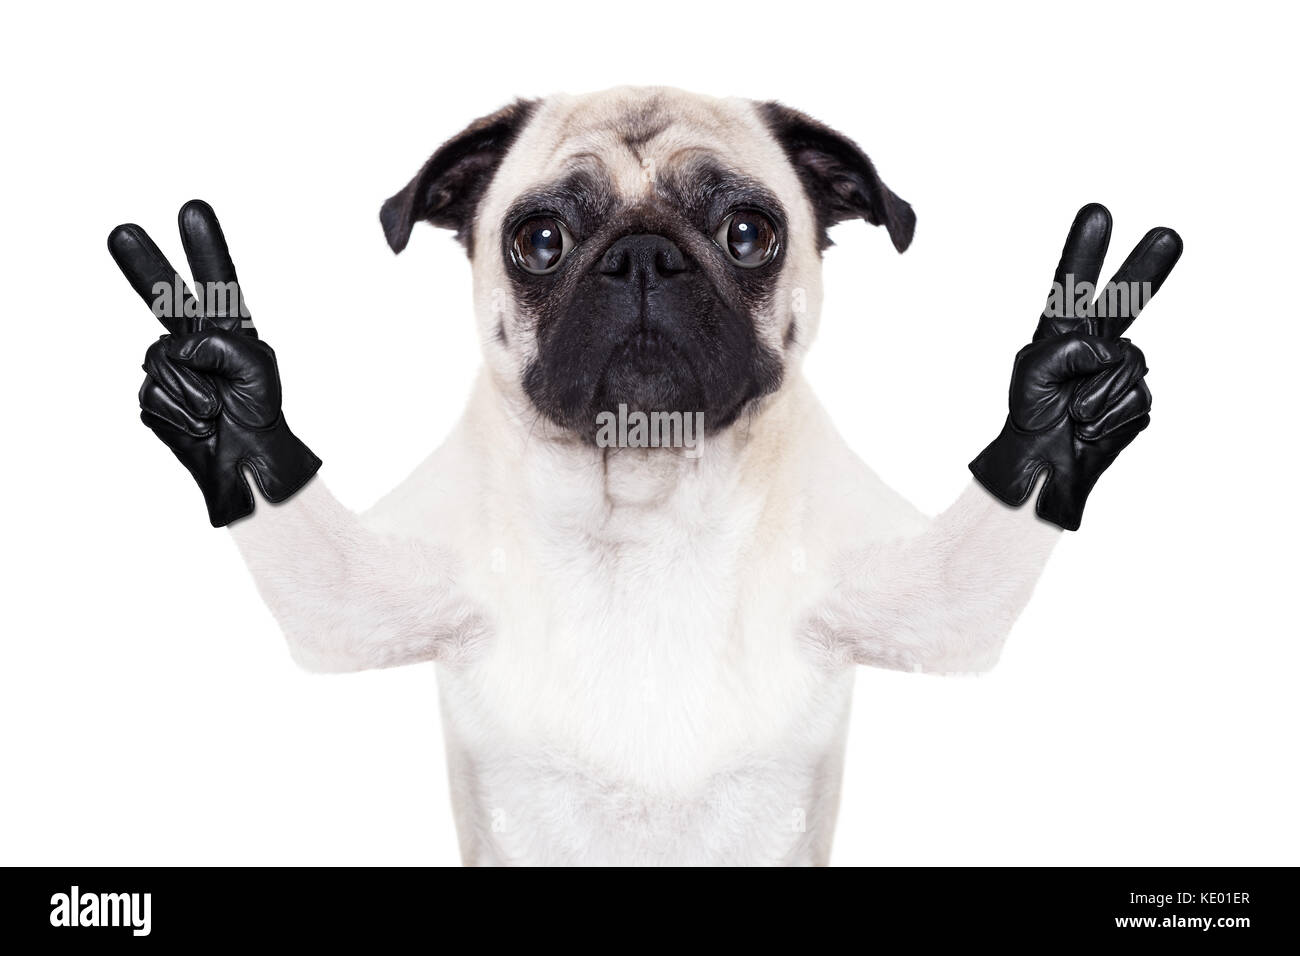 cool pug dog with victory or peace fingers wearing gloves Stock